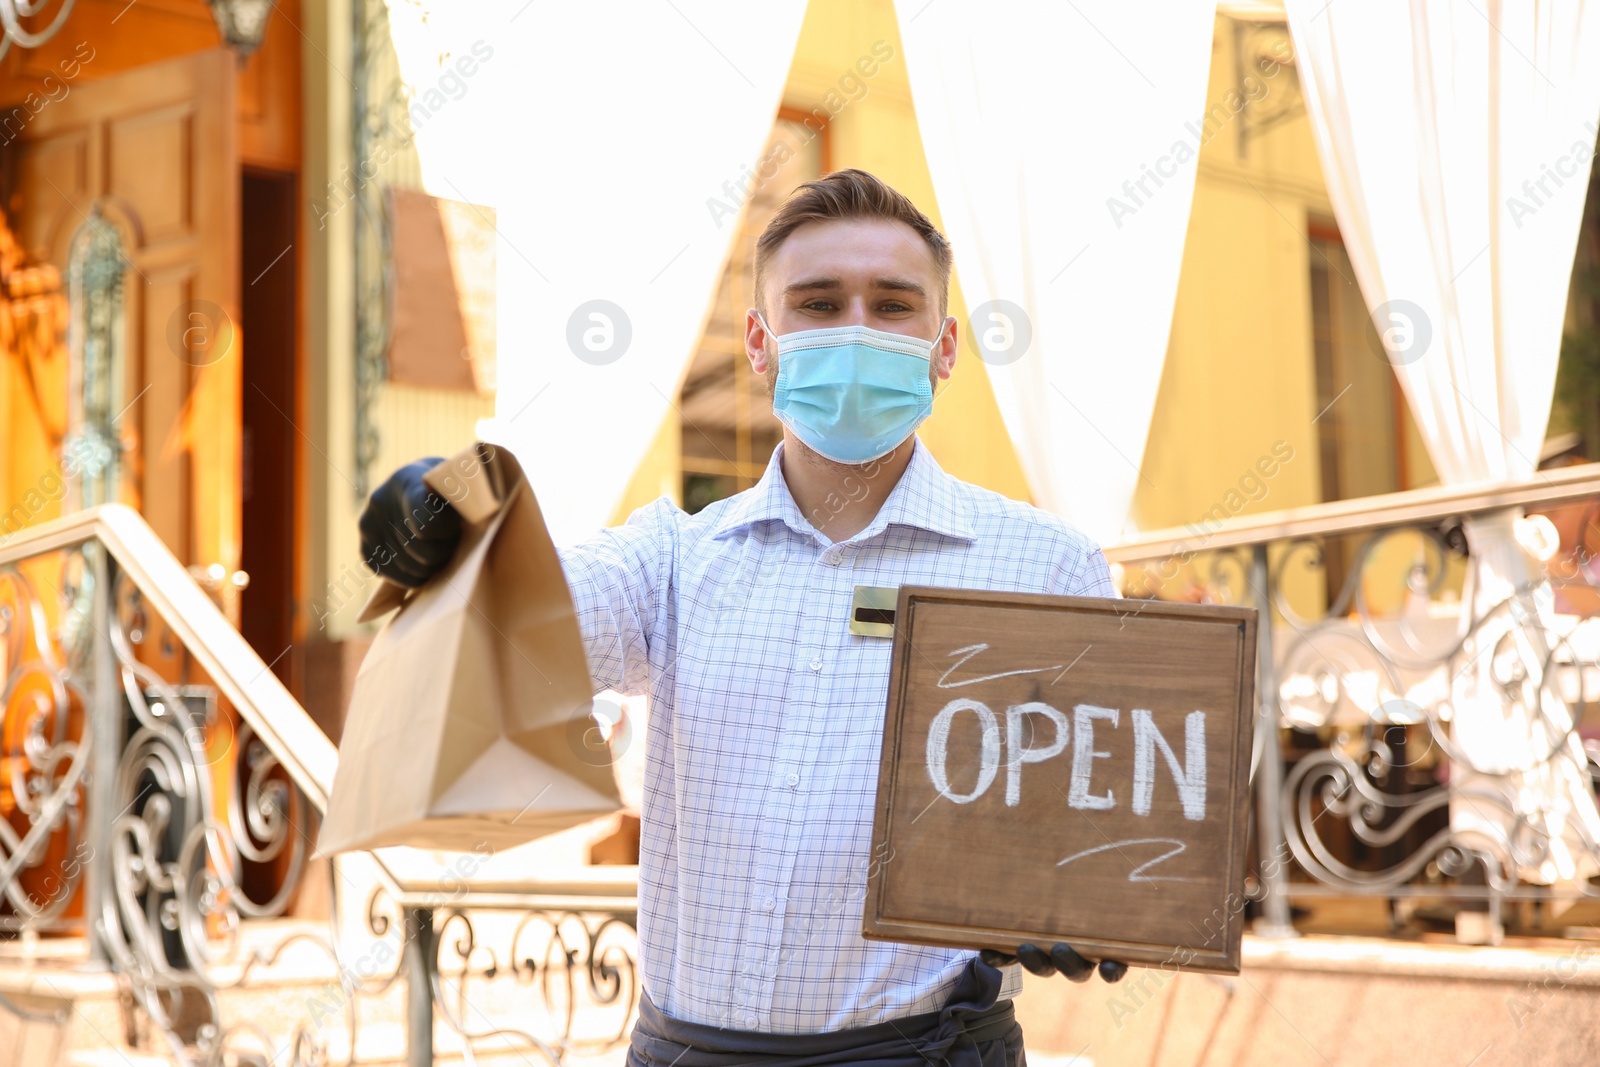 Photo of Waiter with packed takeout order and OPEN sign near restaurant. Food service during coronavirus quarantine